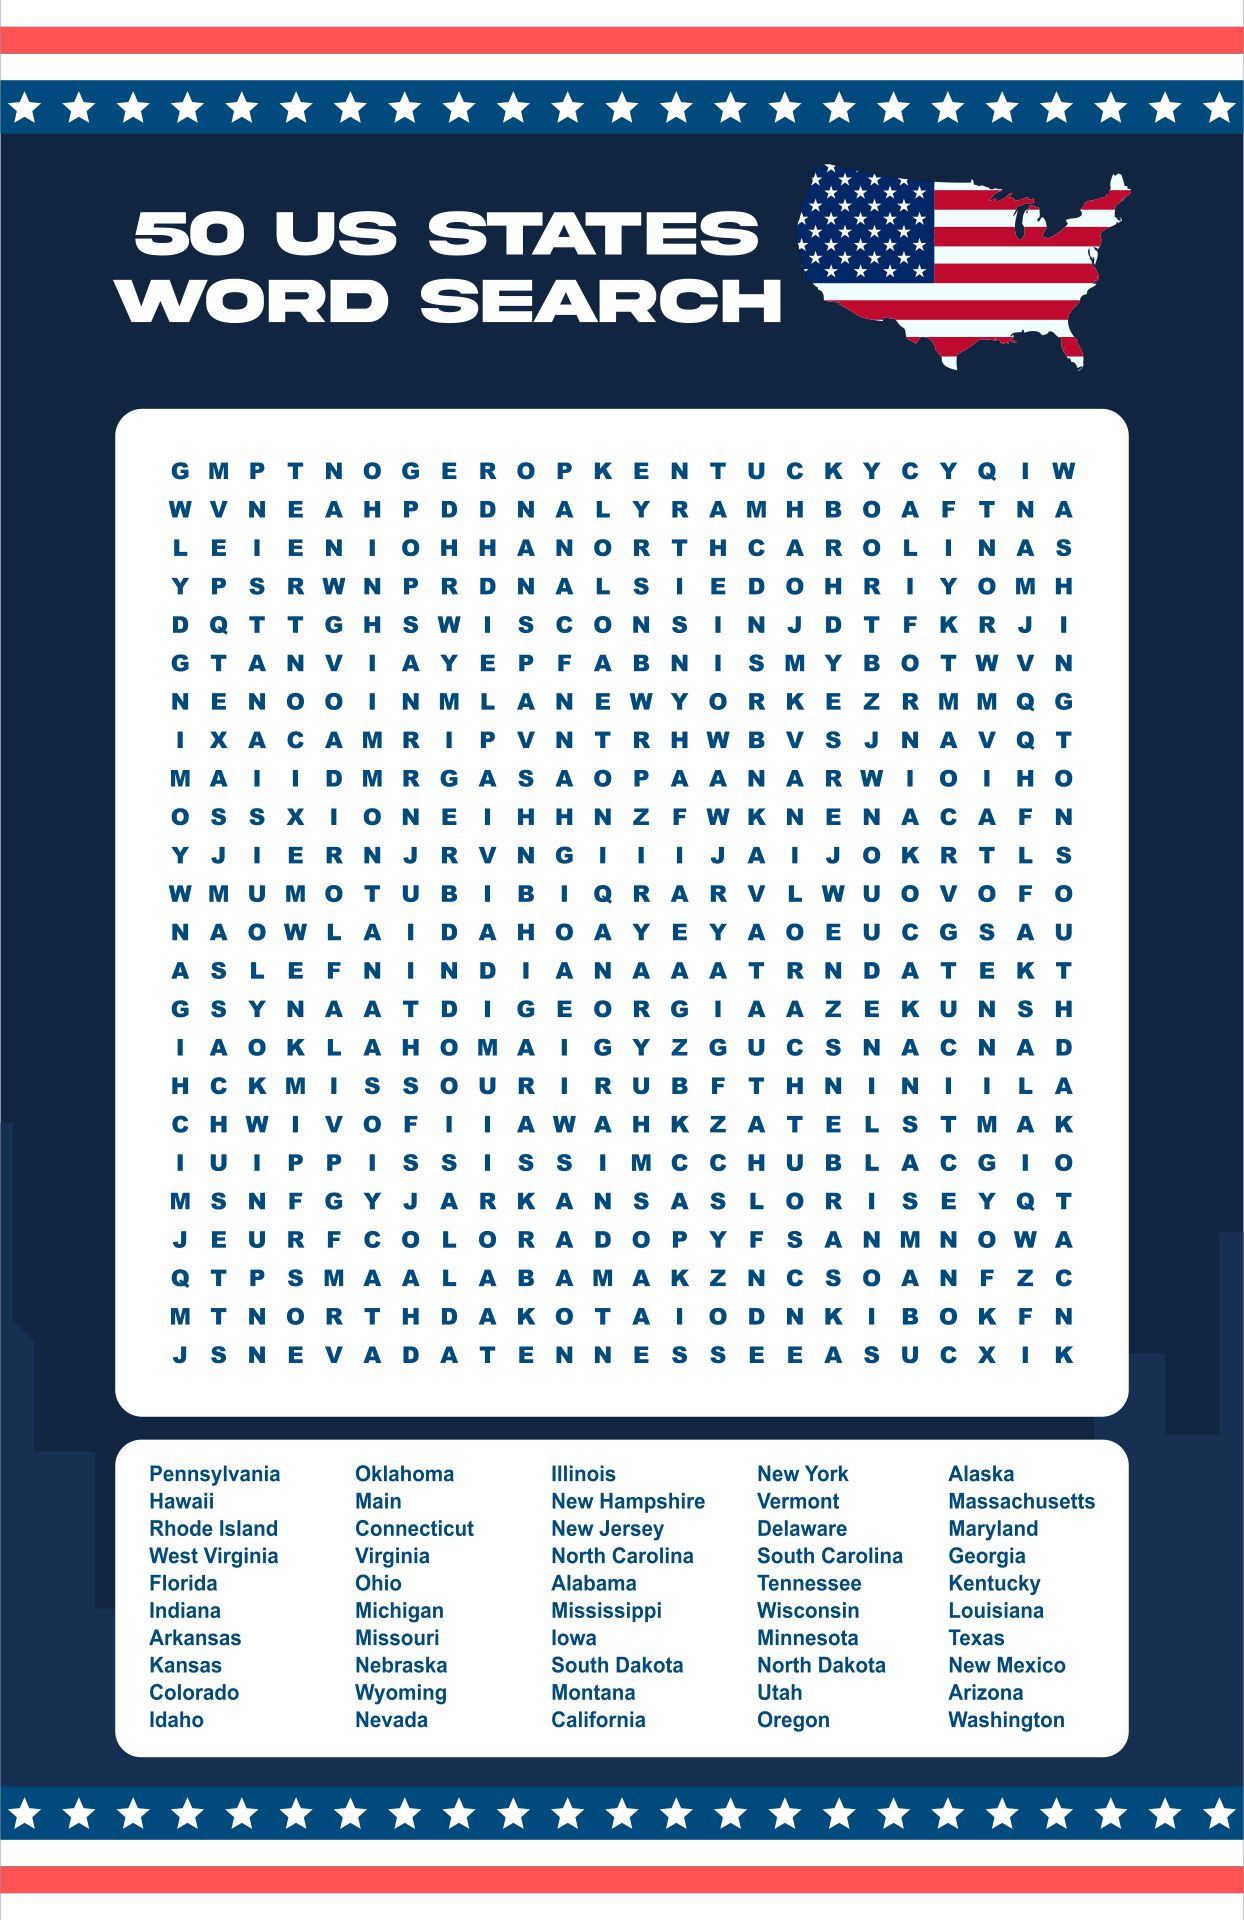 50-us-states-word-search-free-printable-word-search-printable-find